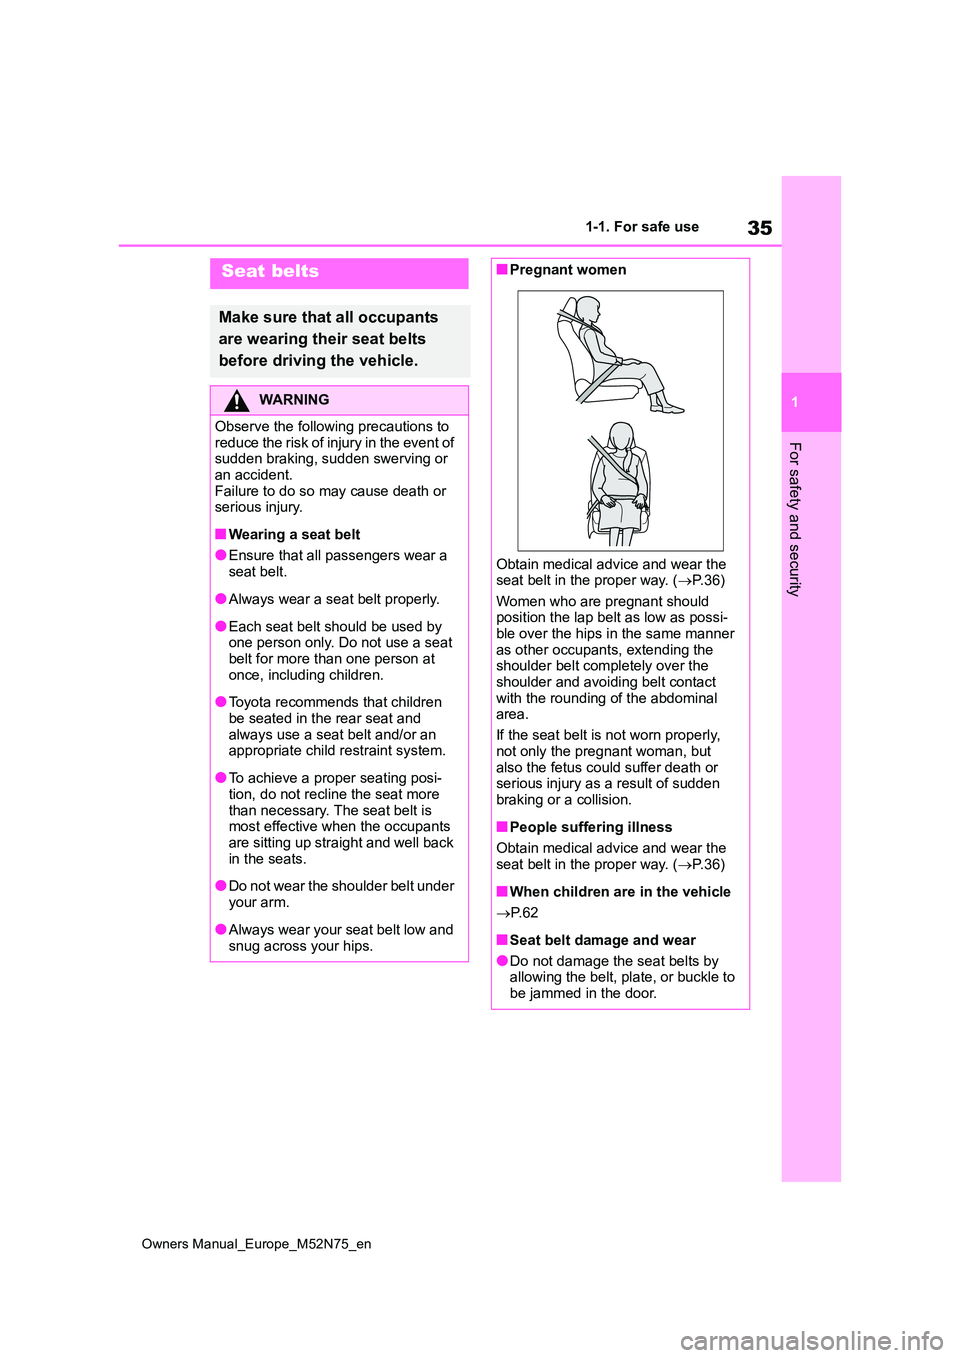 TOYOTA YARIS CROSS 2023  Owners Manual 35
1
Owners Manual_Europe_M52N75_en
1-1. For safe use
For safety and security
Seat belts
Make sure that all occupants  
are wearing their seat belts  
before driving the vehicle.
WARNING
Observe the f